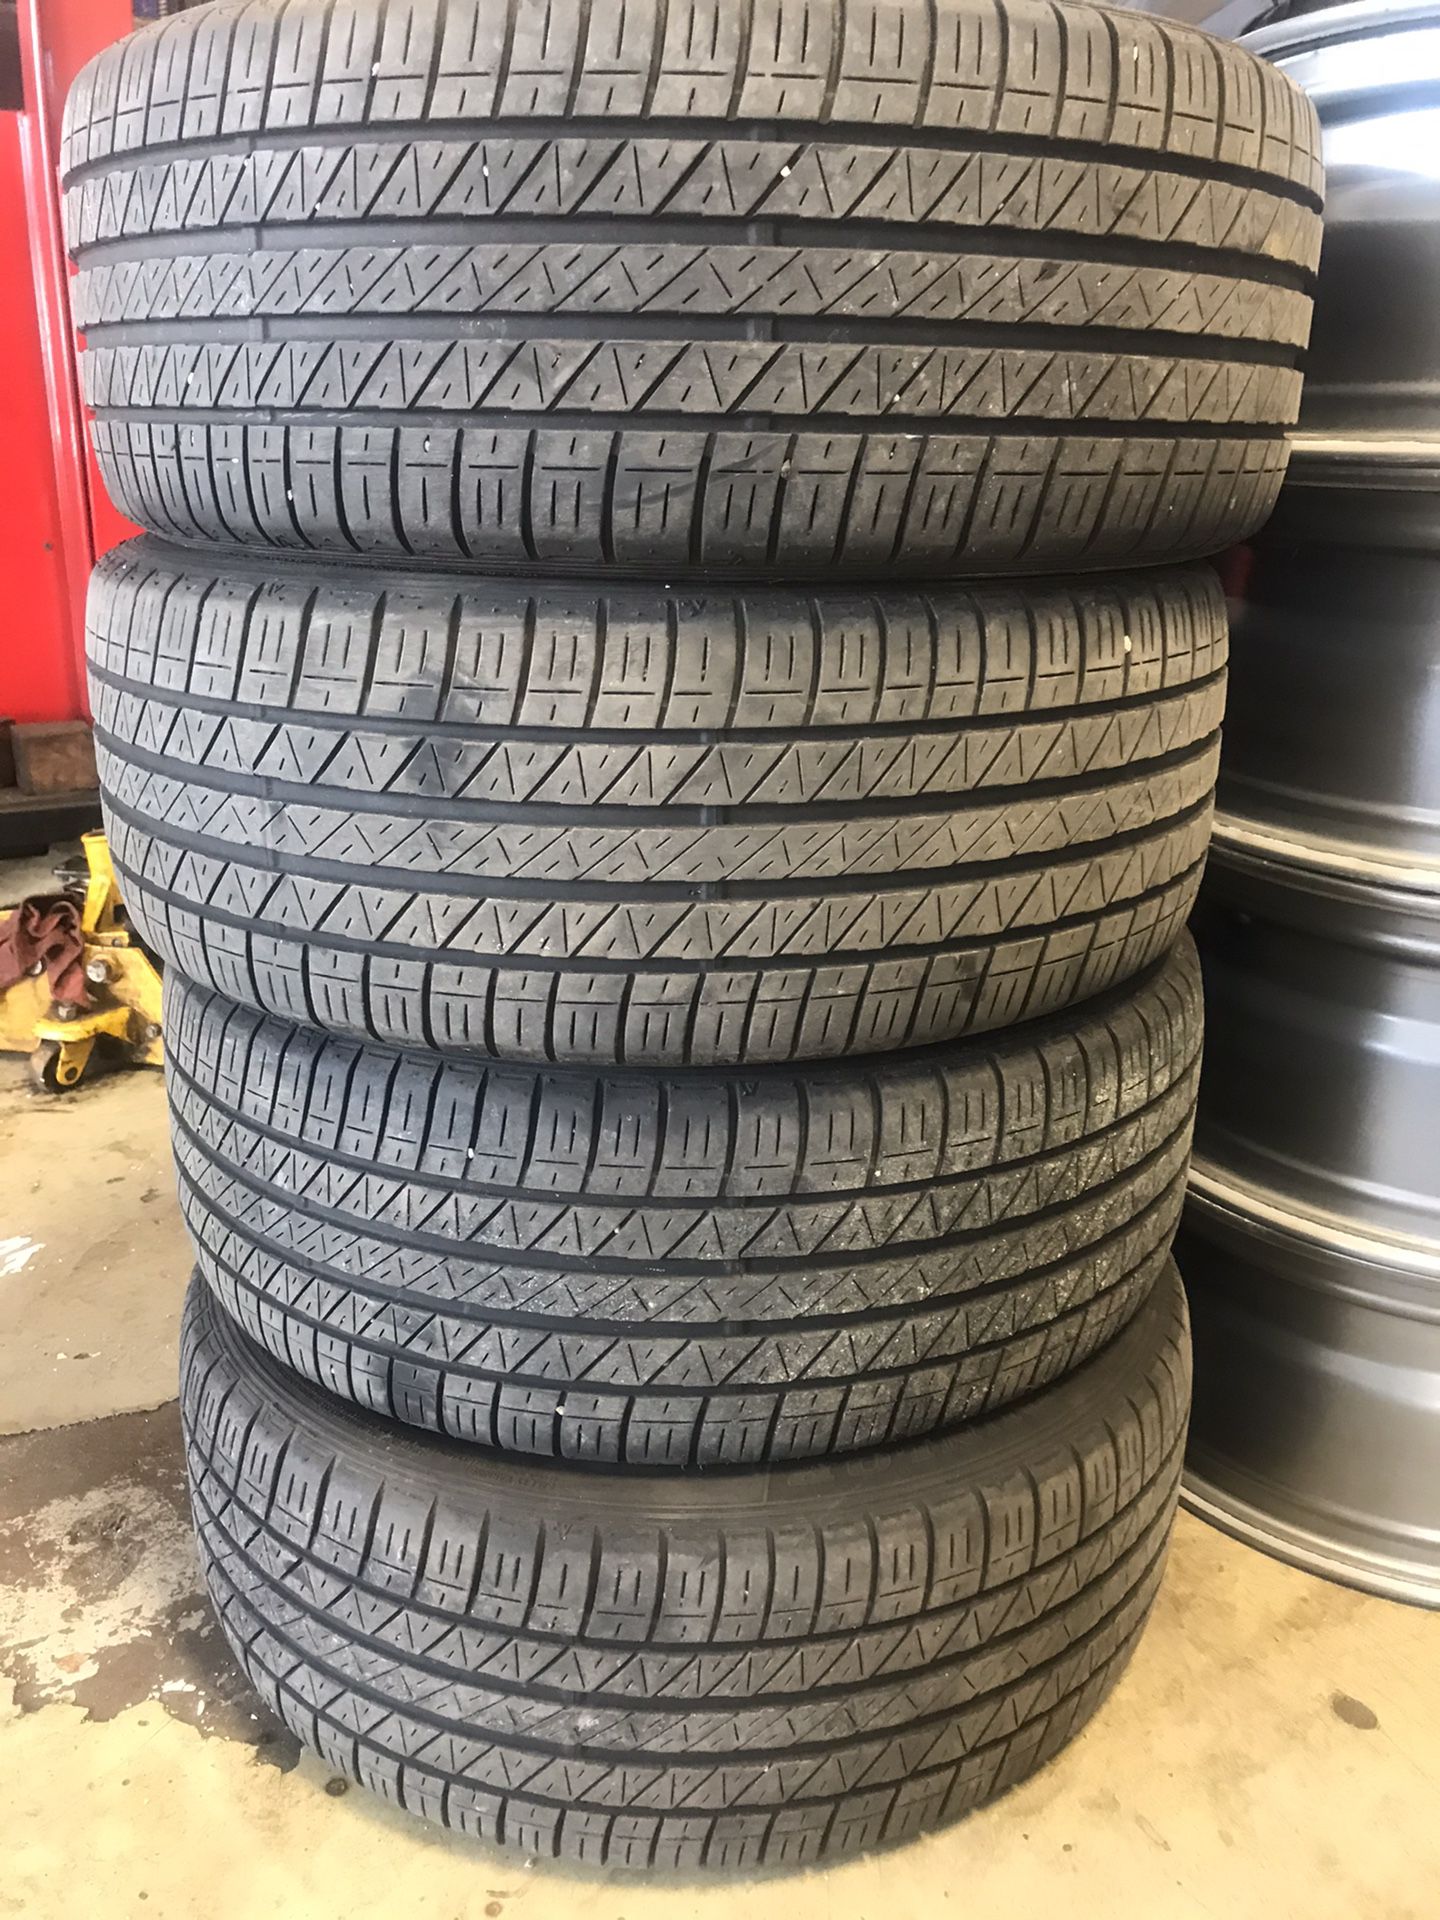 Used Tires for $80:00